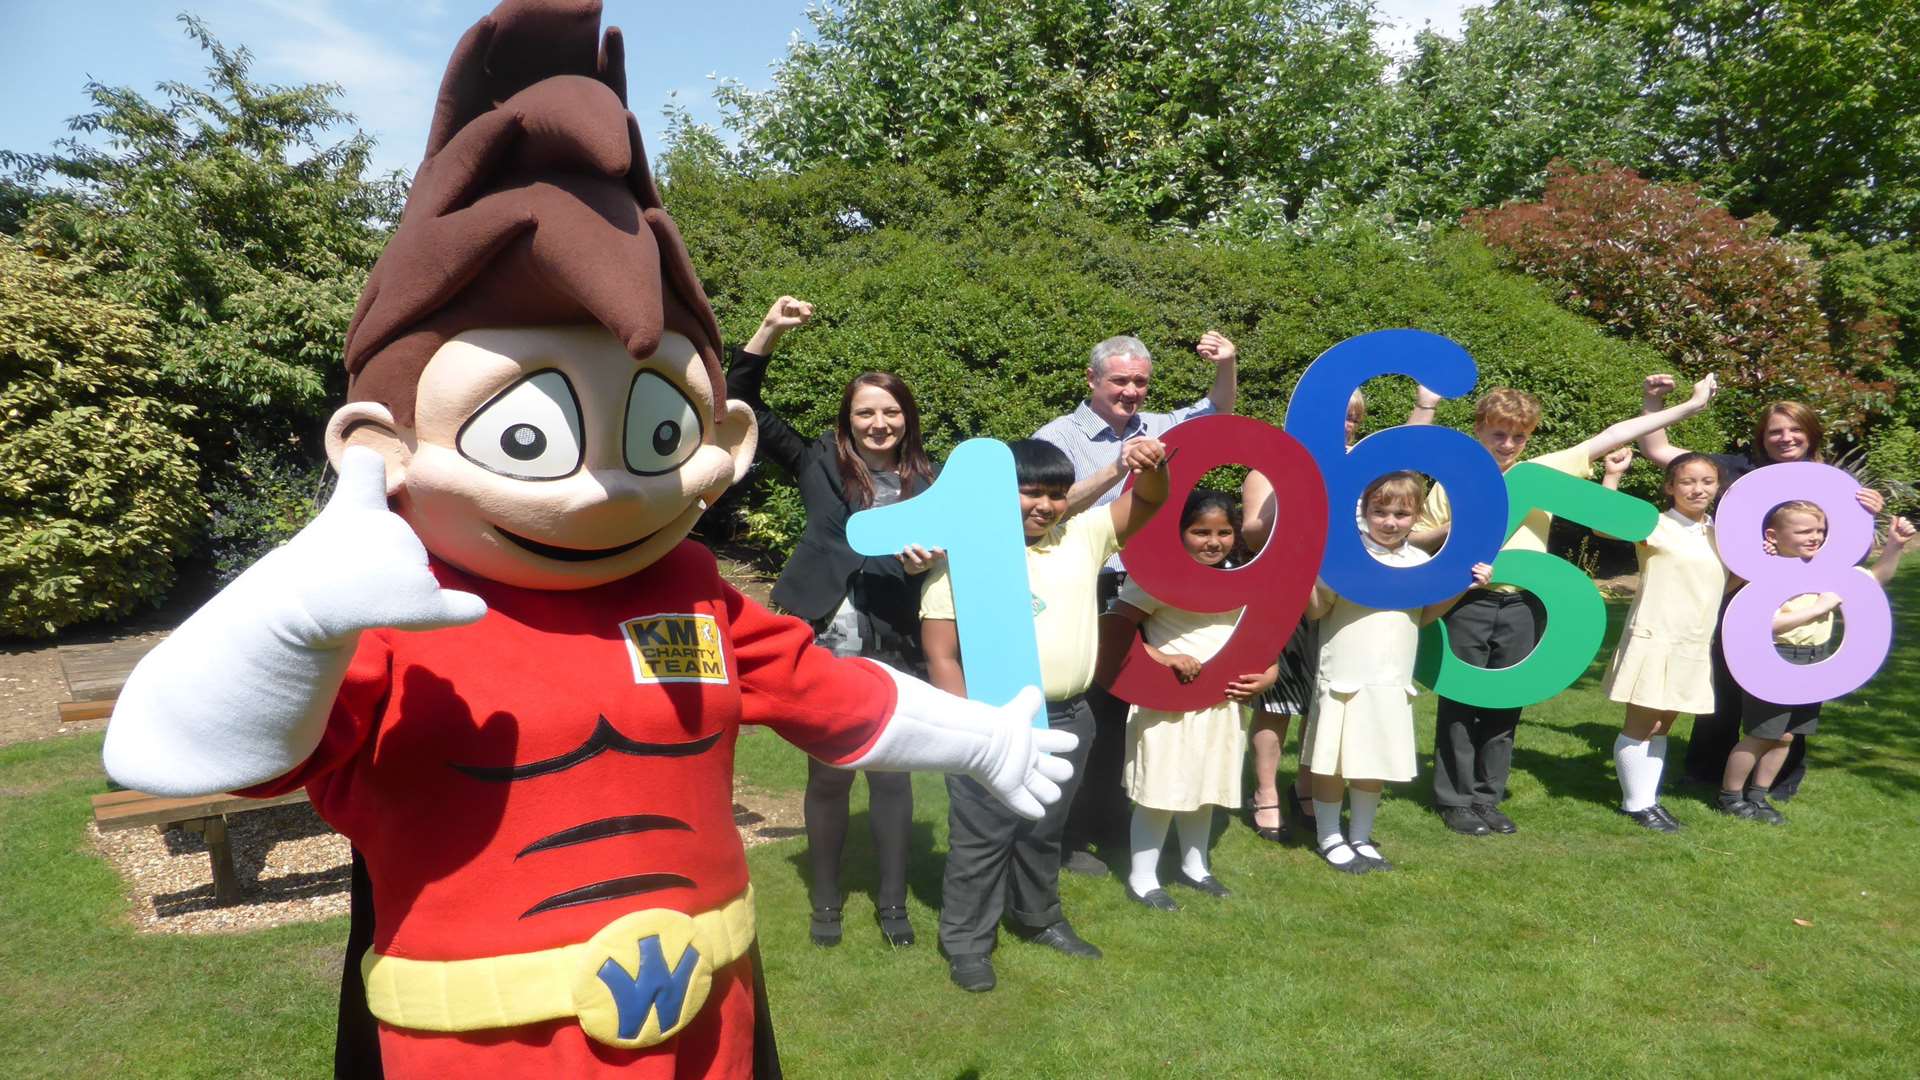 Pupils from St Francis' Catholic Primary School, Maidstone join KM Walk to School mascot Wowzer, partners and sponsors to announce the number of school run car journeys removed from Maidstone roads so far this academic year.